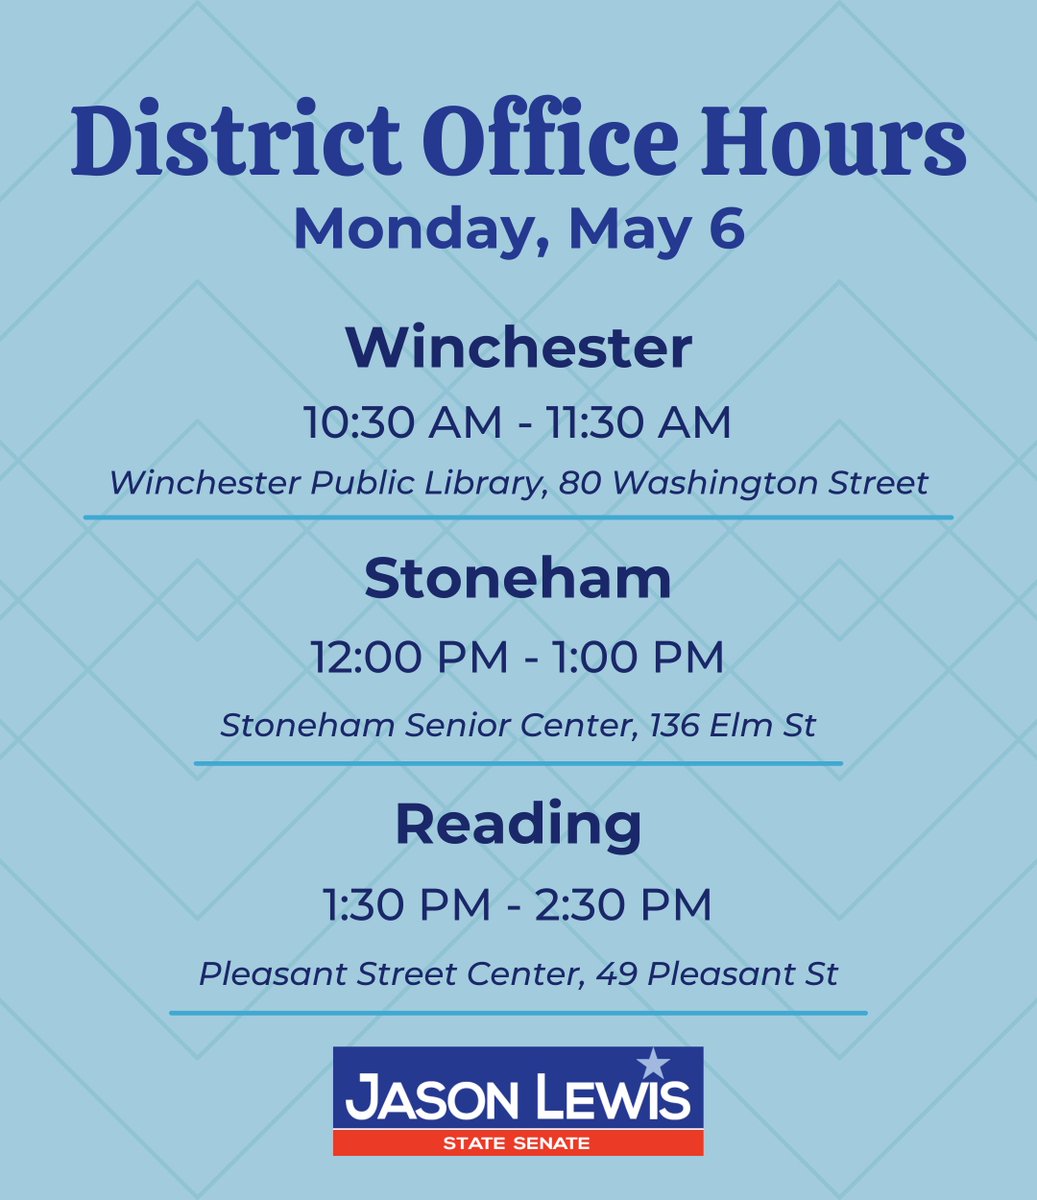 Join us tomorrow for Office Hours in Winchester, Stoneham, and Reading!